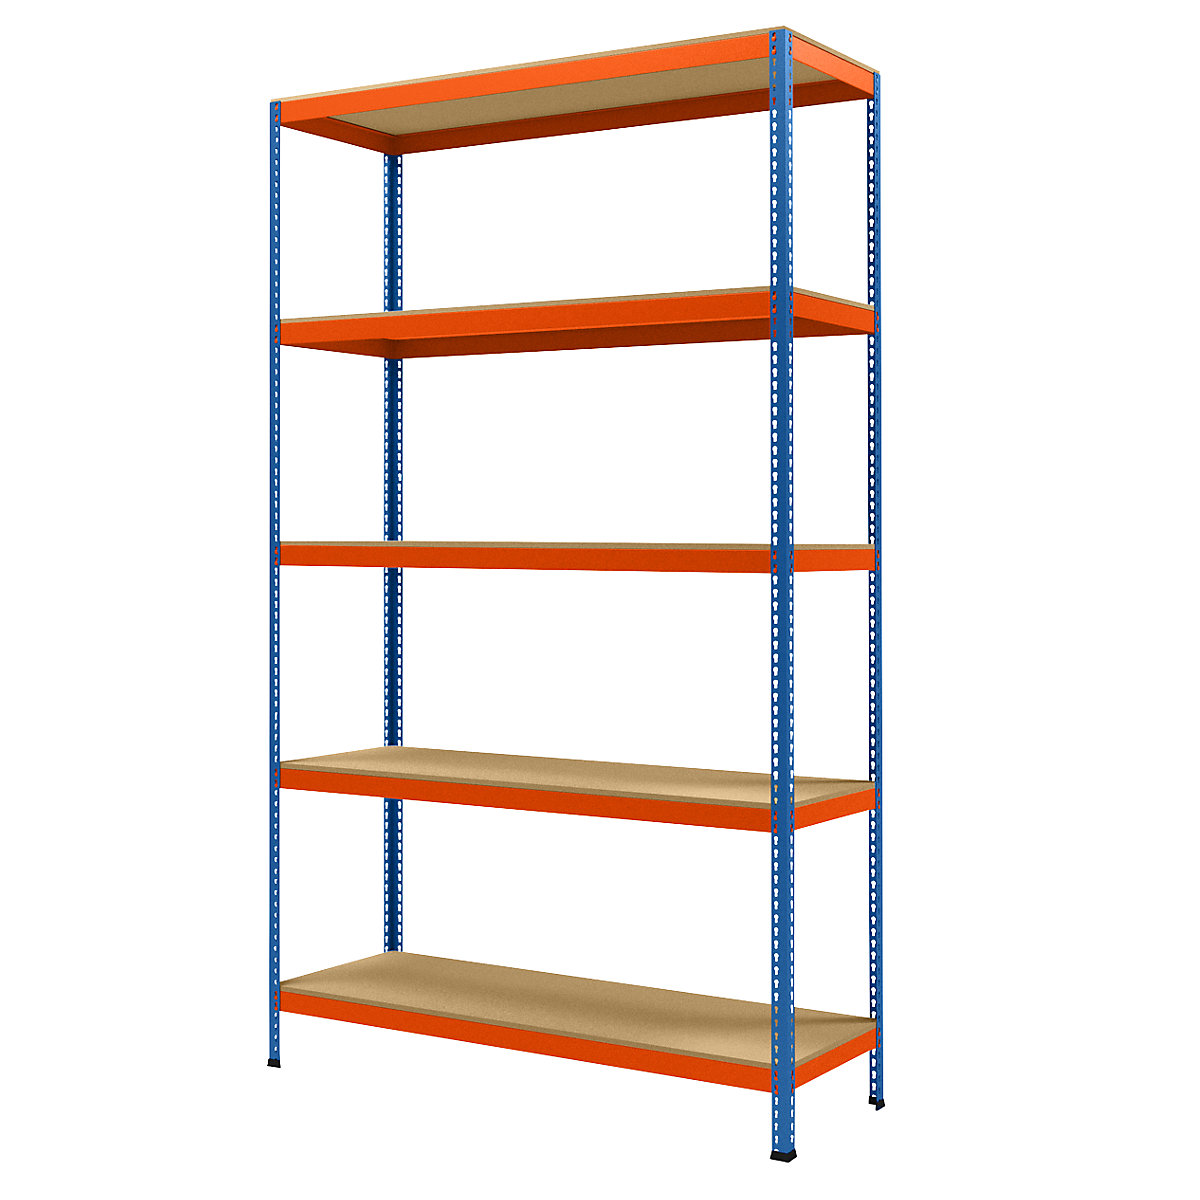 Wide span heavy duty shelving, height 3048 mm, overall depth 621 mm, width 1841 mm